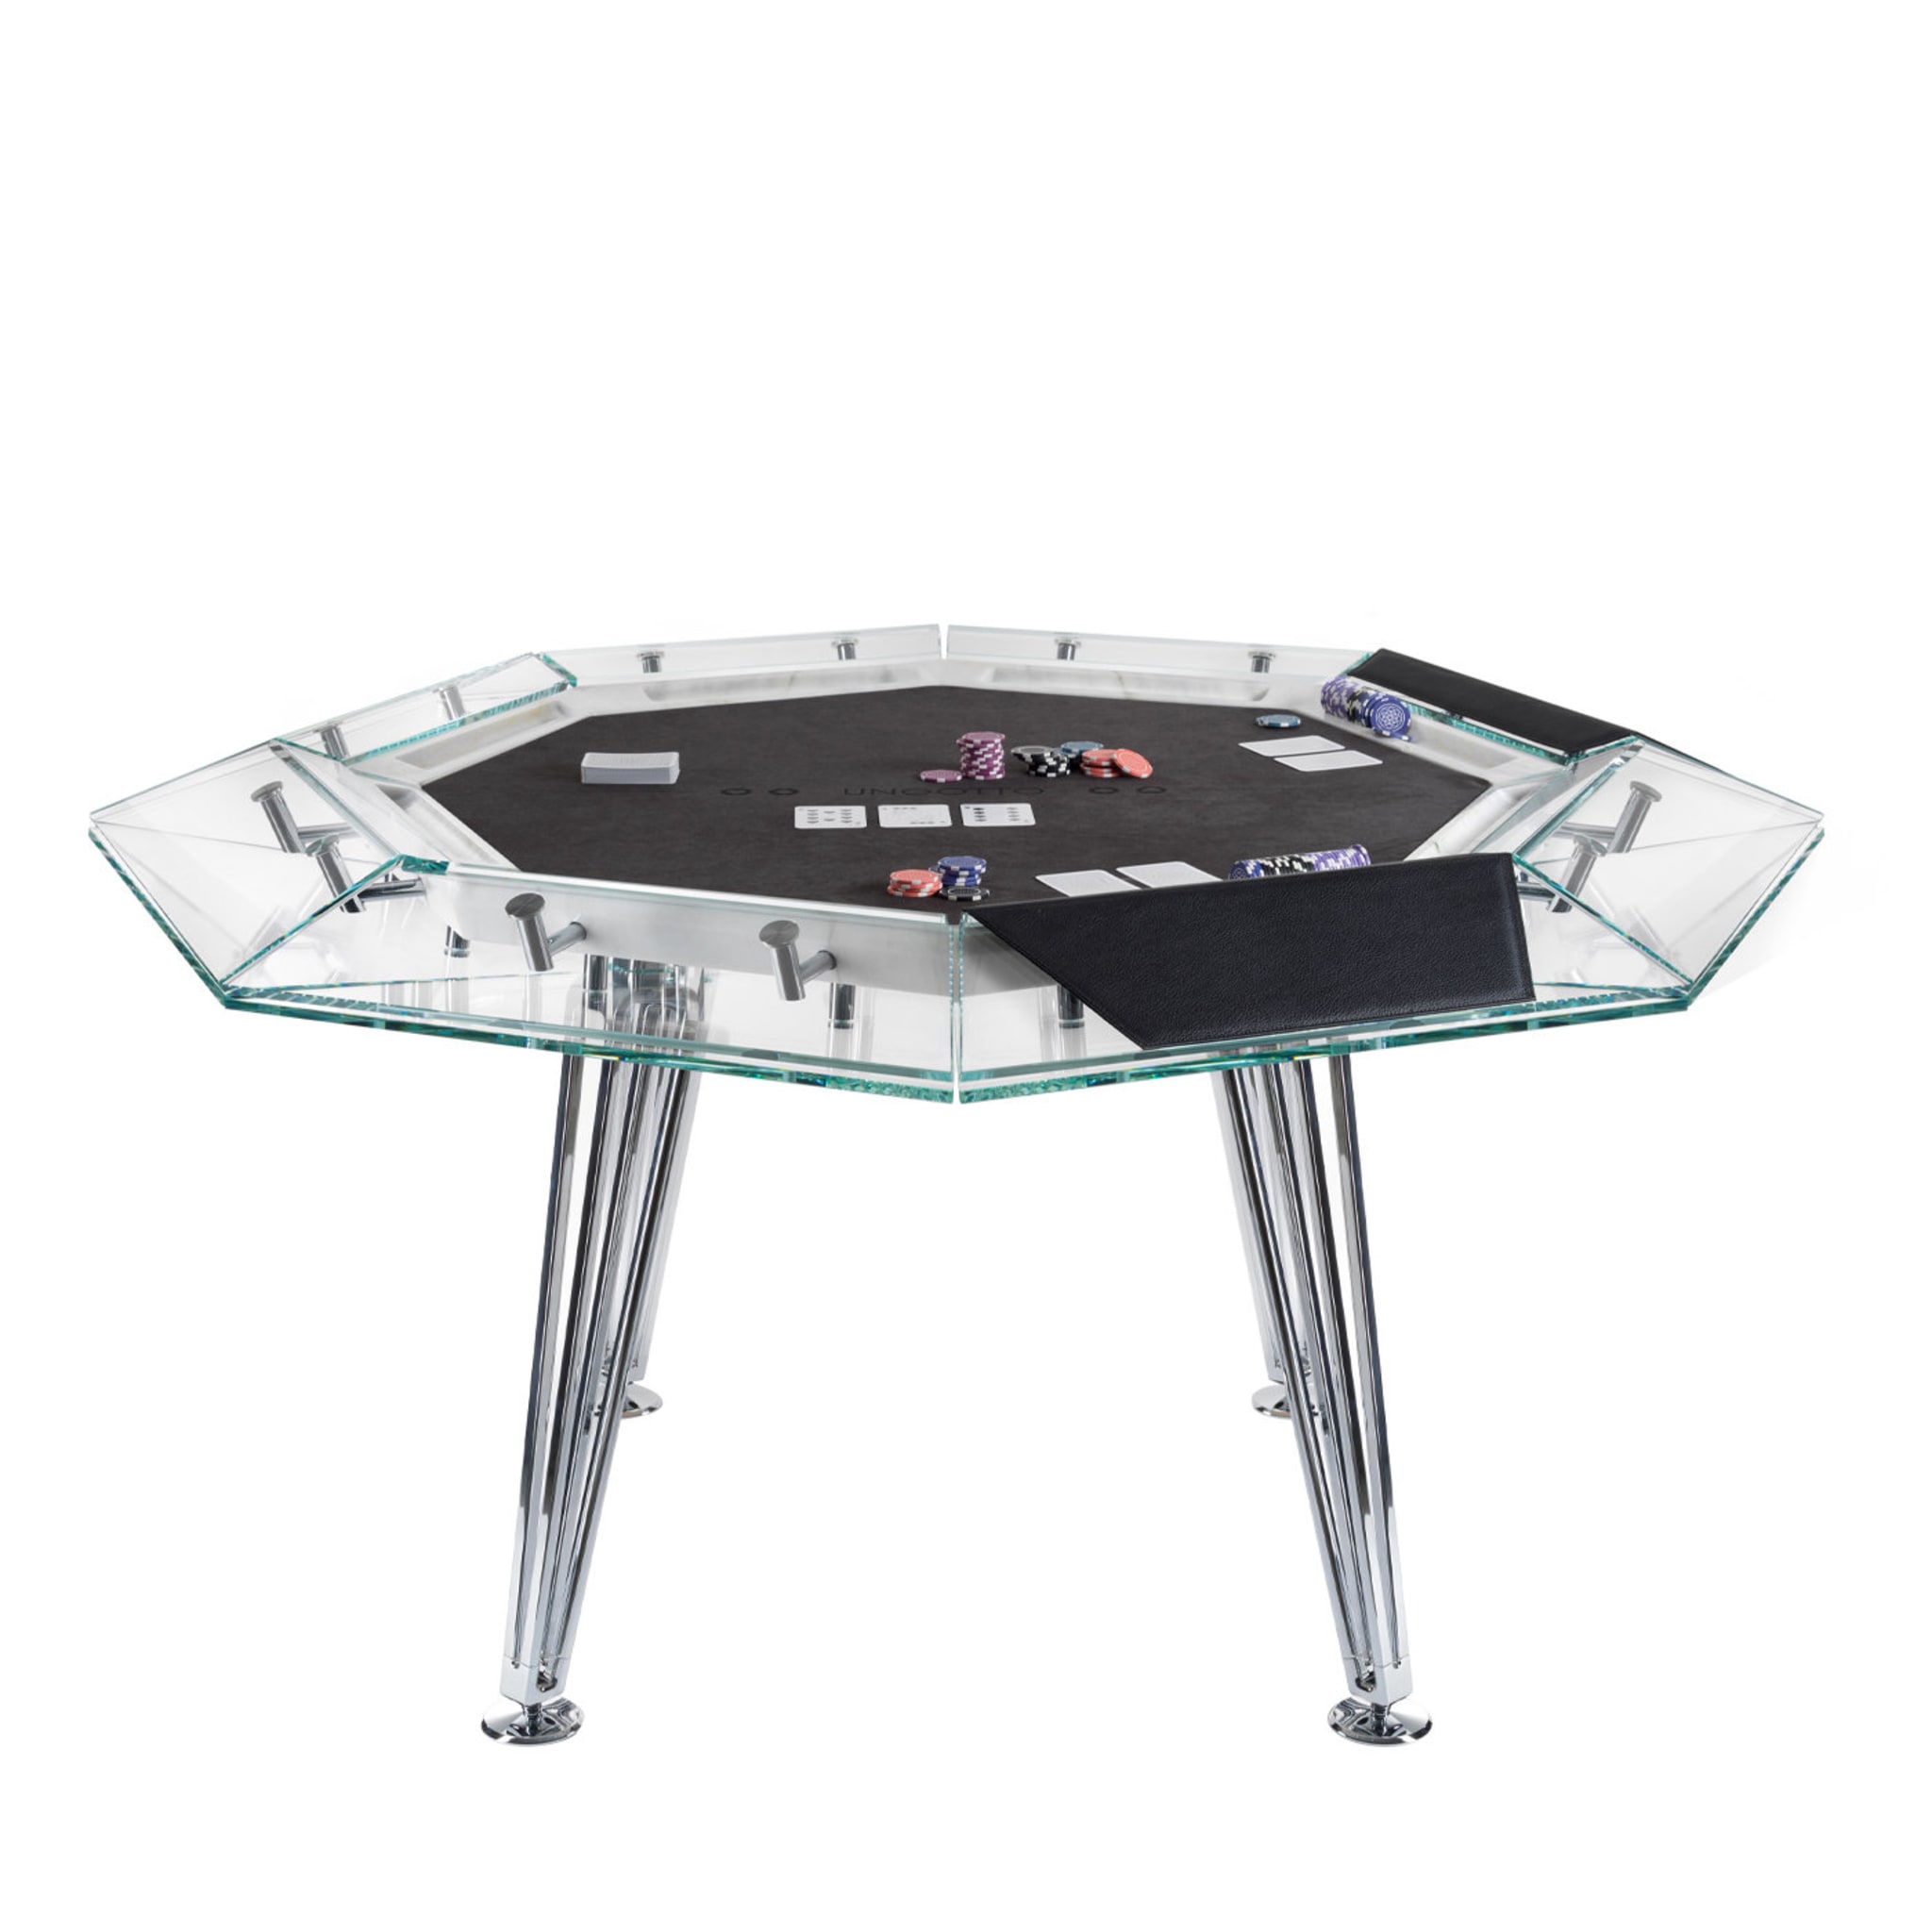 Unootto 8 Player Marble Edition Poker Table - Main view